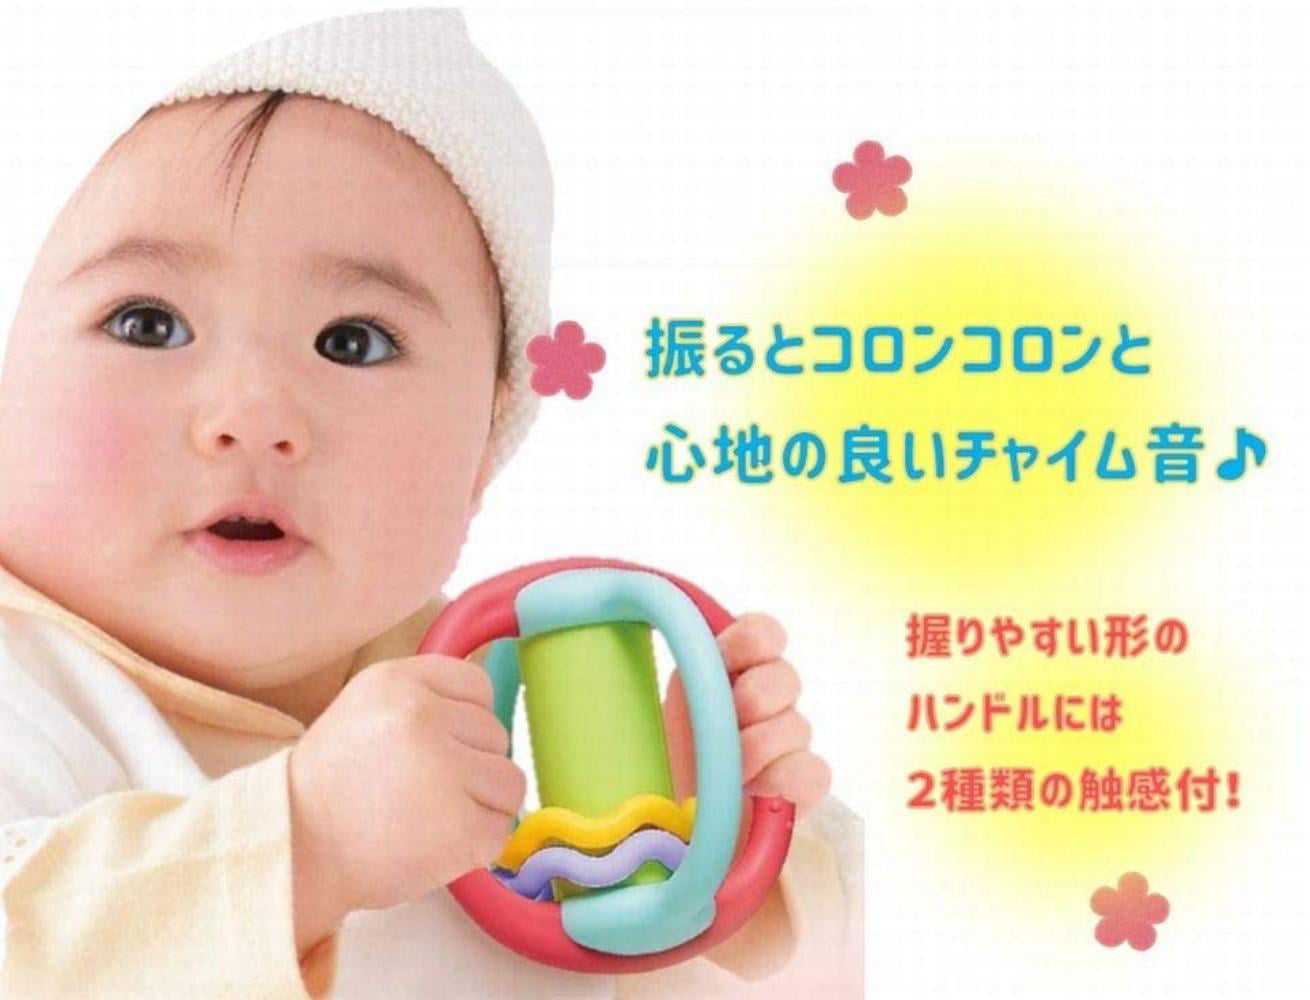 Calming Soothie Sound & Textures Award Winning Design in Japan Ages 3+ Month Develops Coordination & Motor Skills TOYLAB The Little Orbit Rattle Teething Toy with Multiple Sensory Points